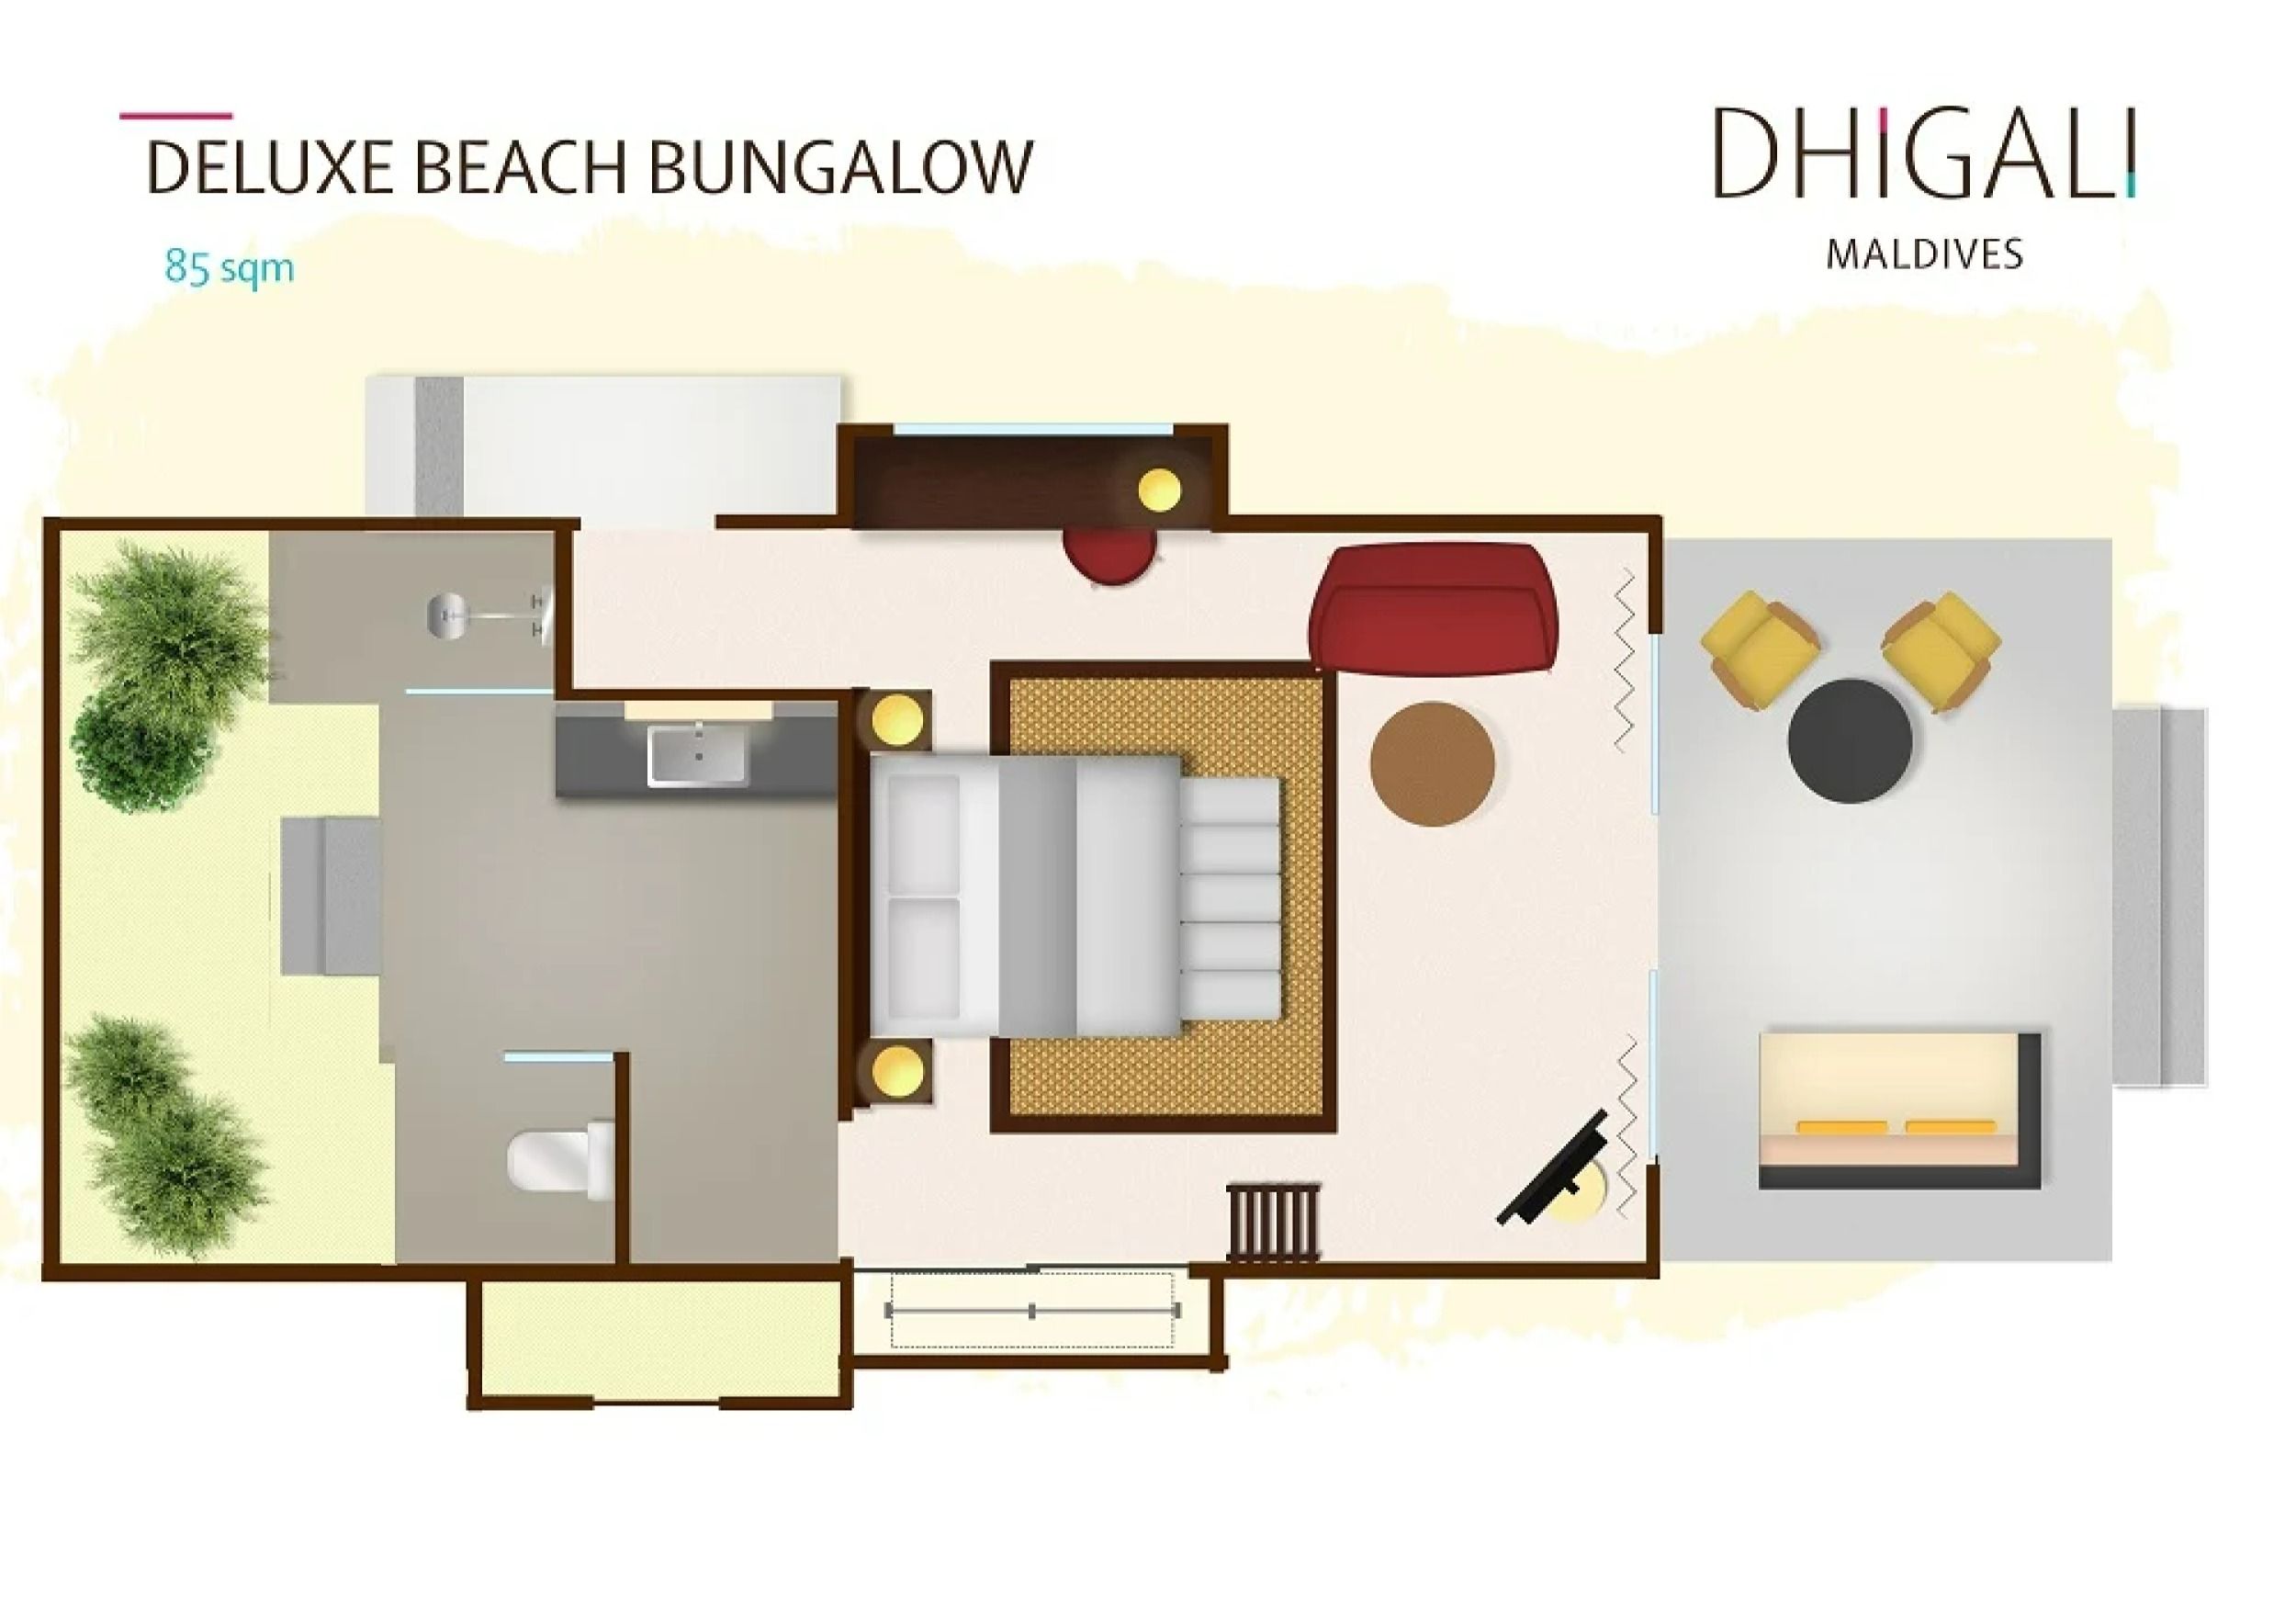 Deluxe Beach Bungalow - Dhigali Maldives